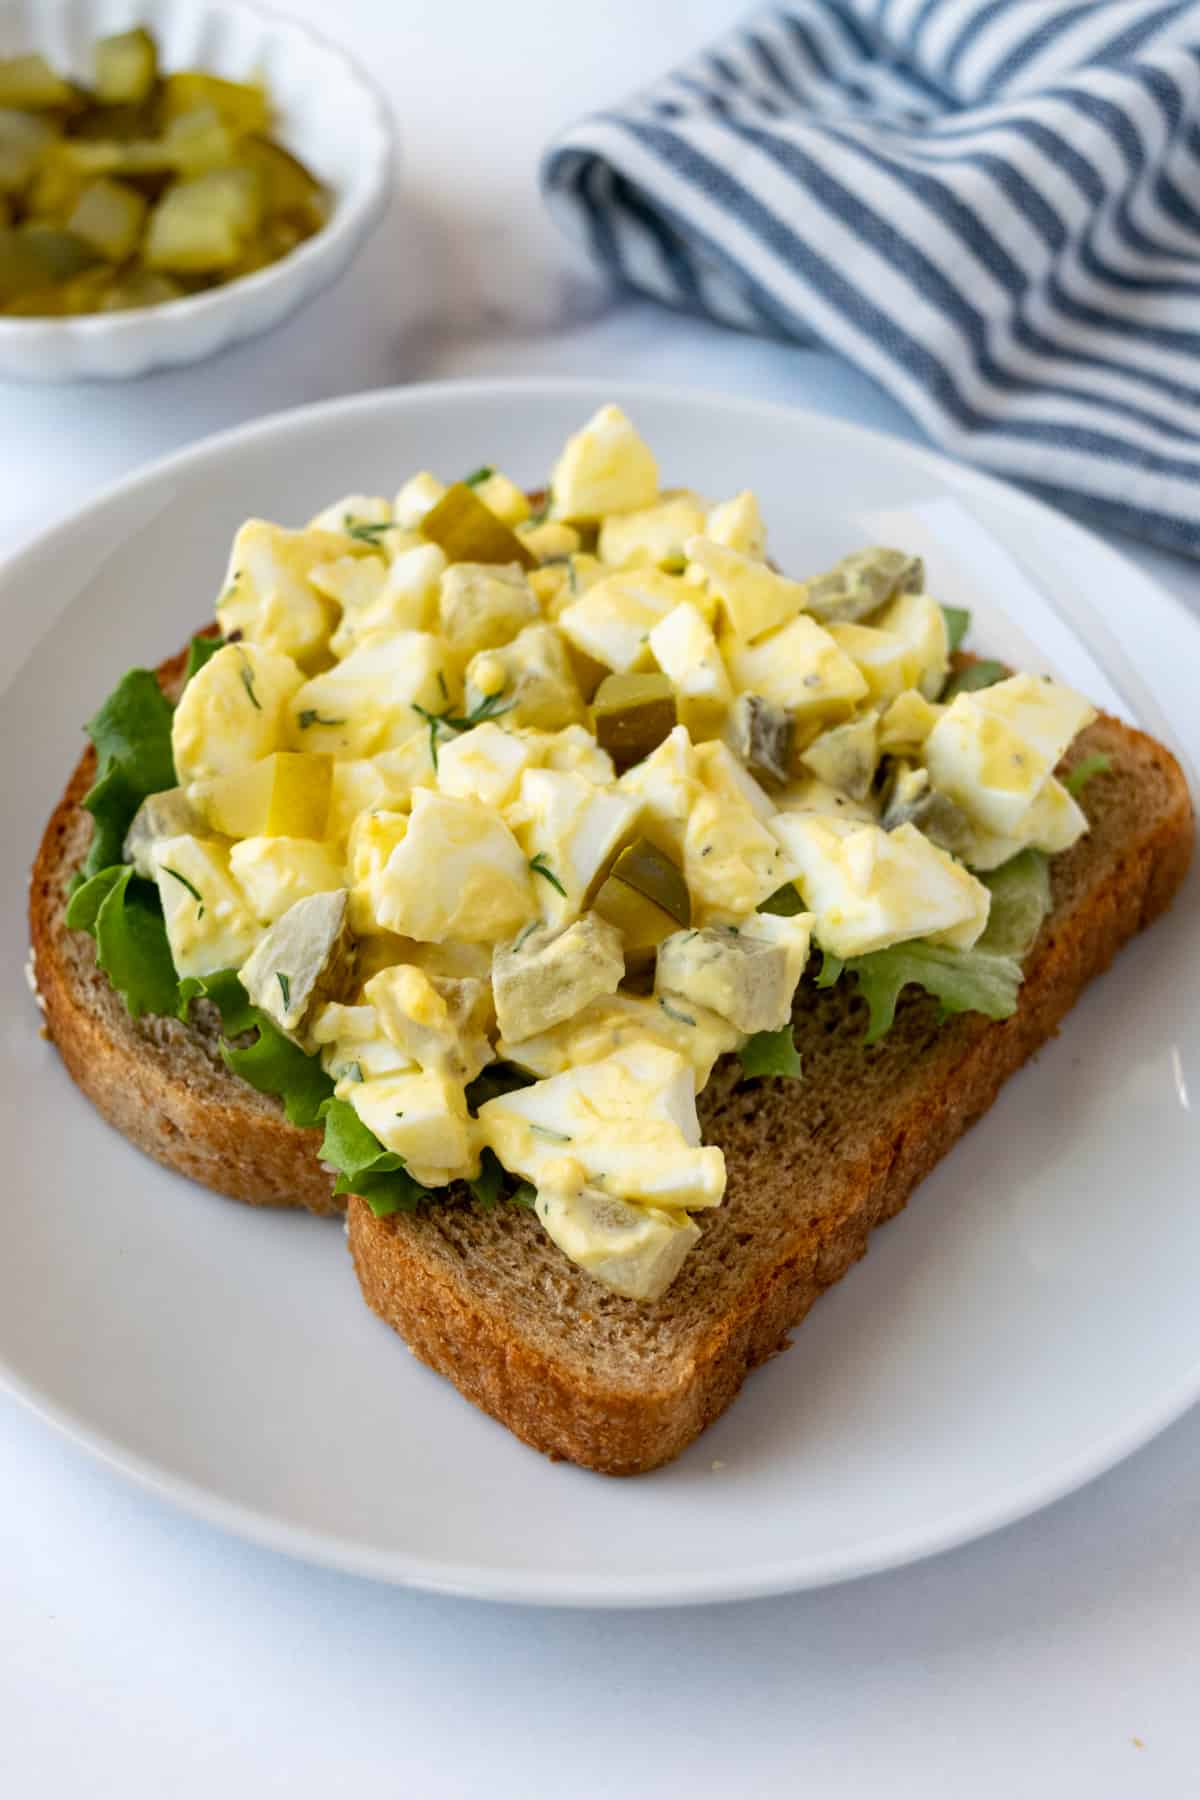 Egg Salad with Pickles on Wheat Toast.